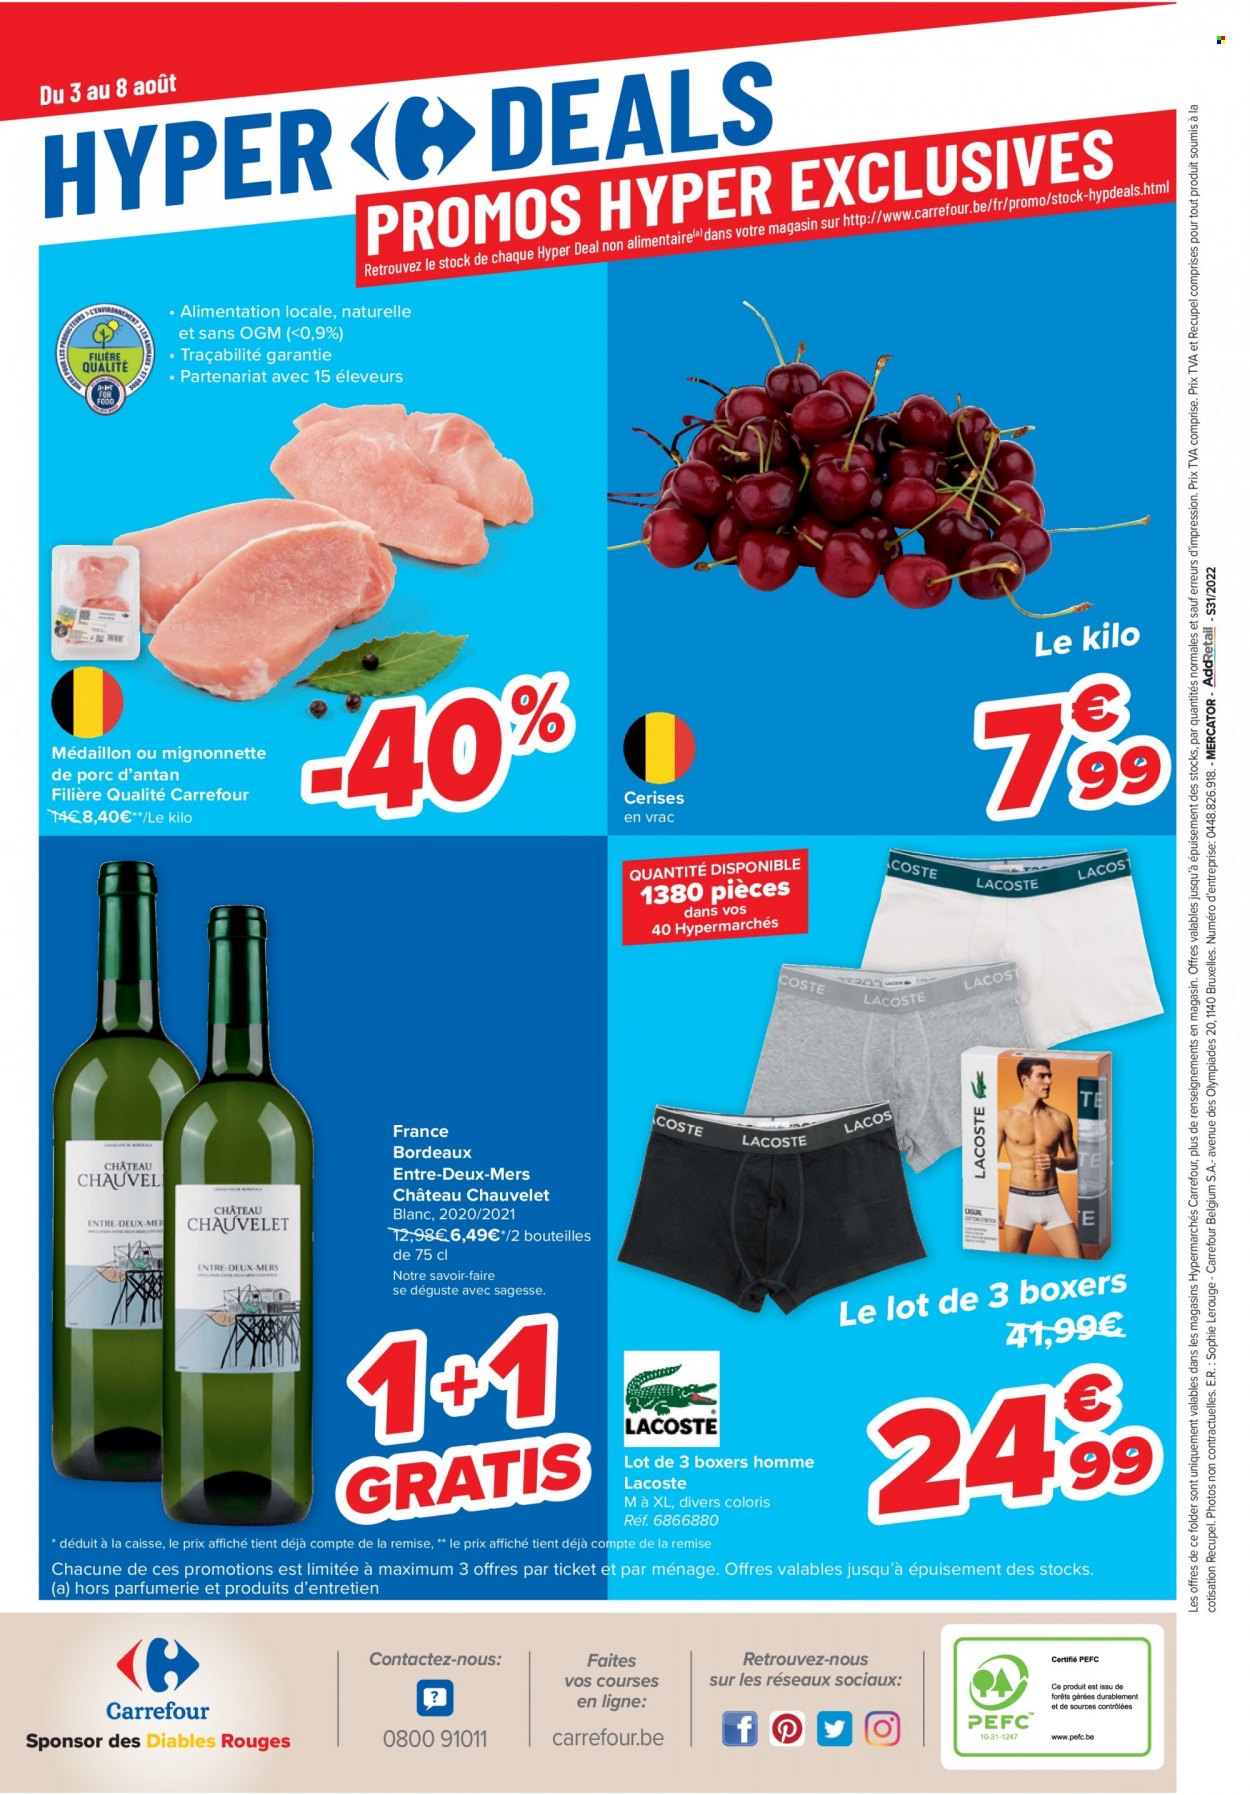 Catalogue Carrefour hypermarkt - 3.8.2022 - 16.8.2022. Page 24.